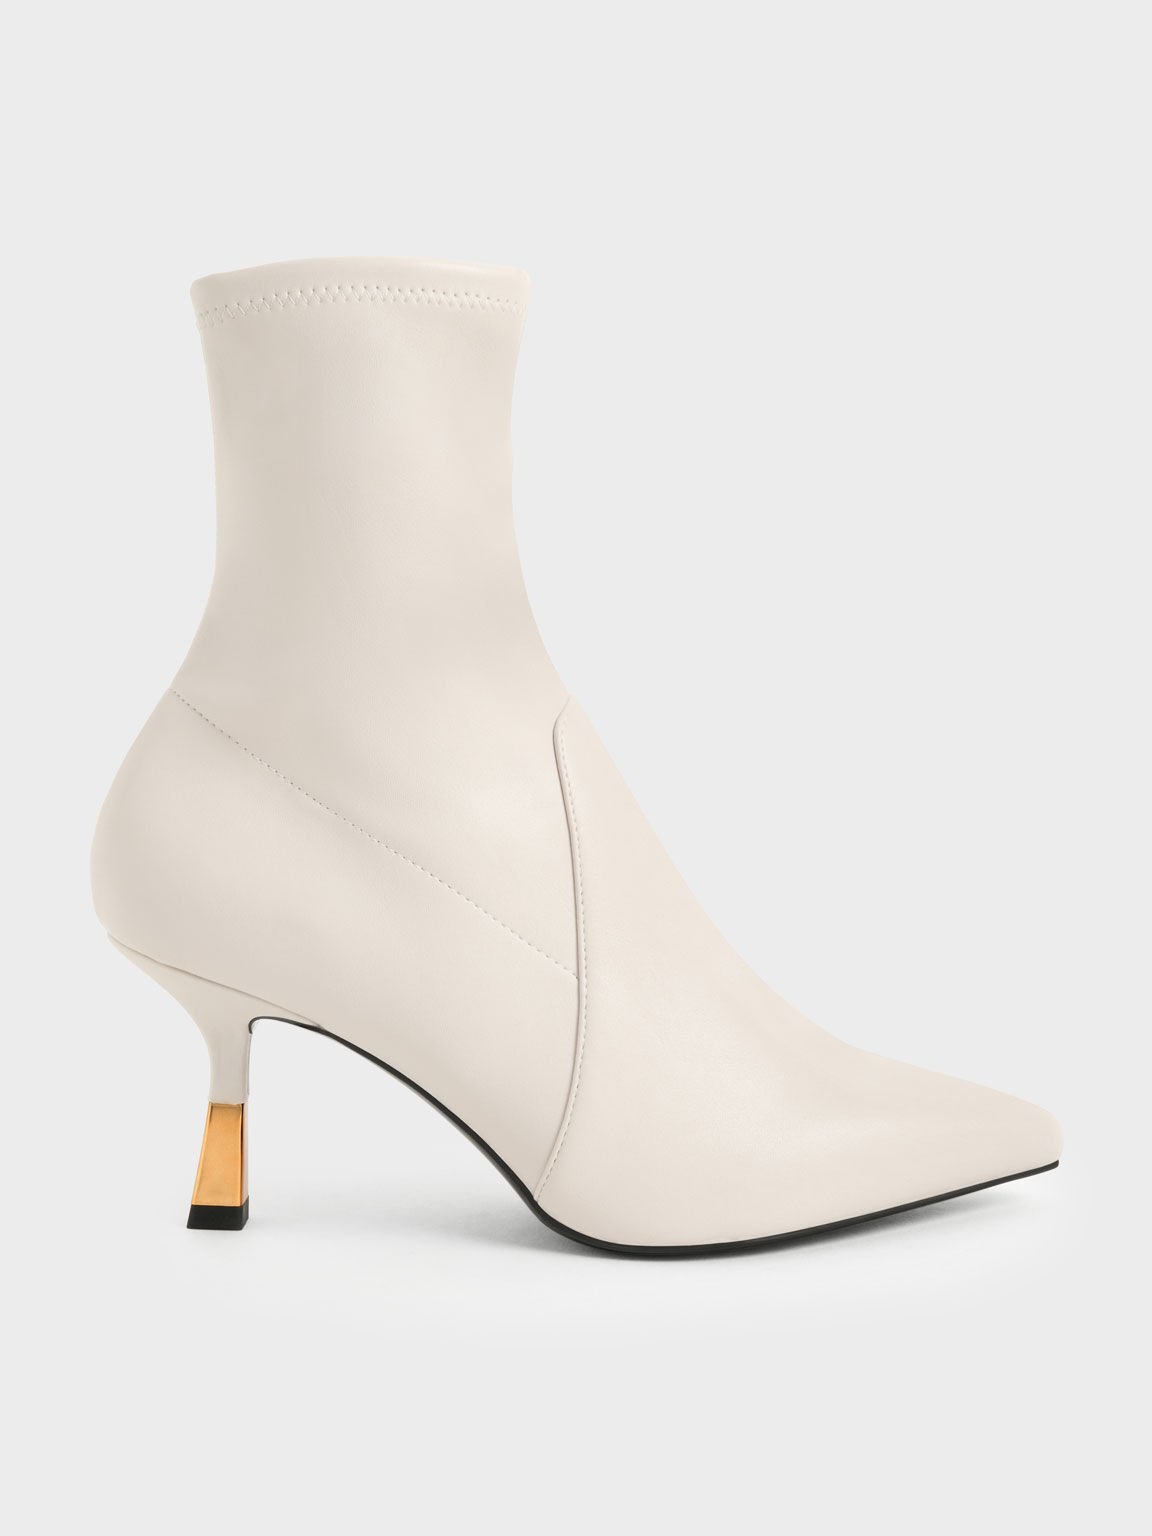 Chalk Kitten Heel Ankle Boots - CHARLES & KEITH US